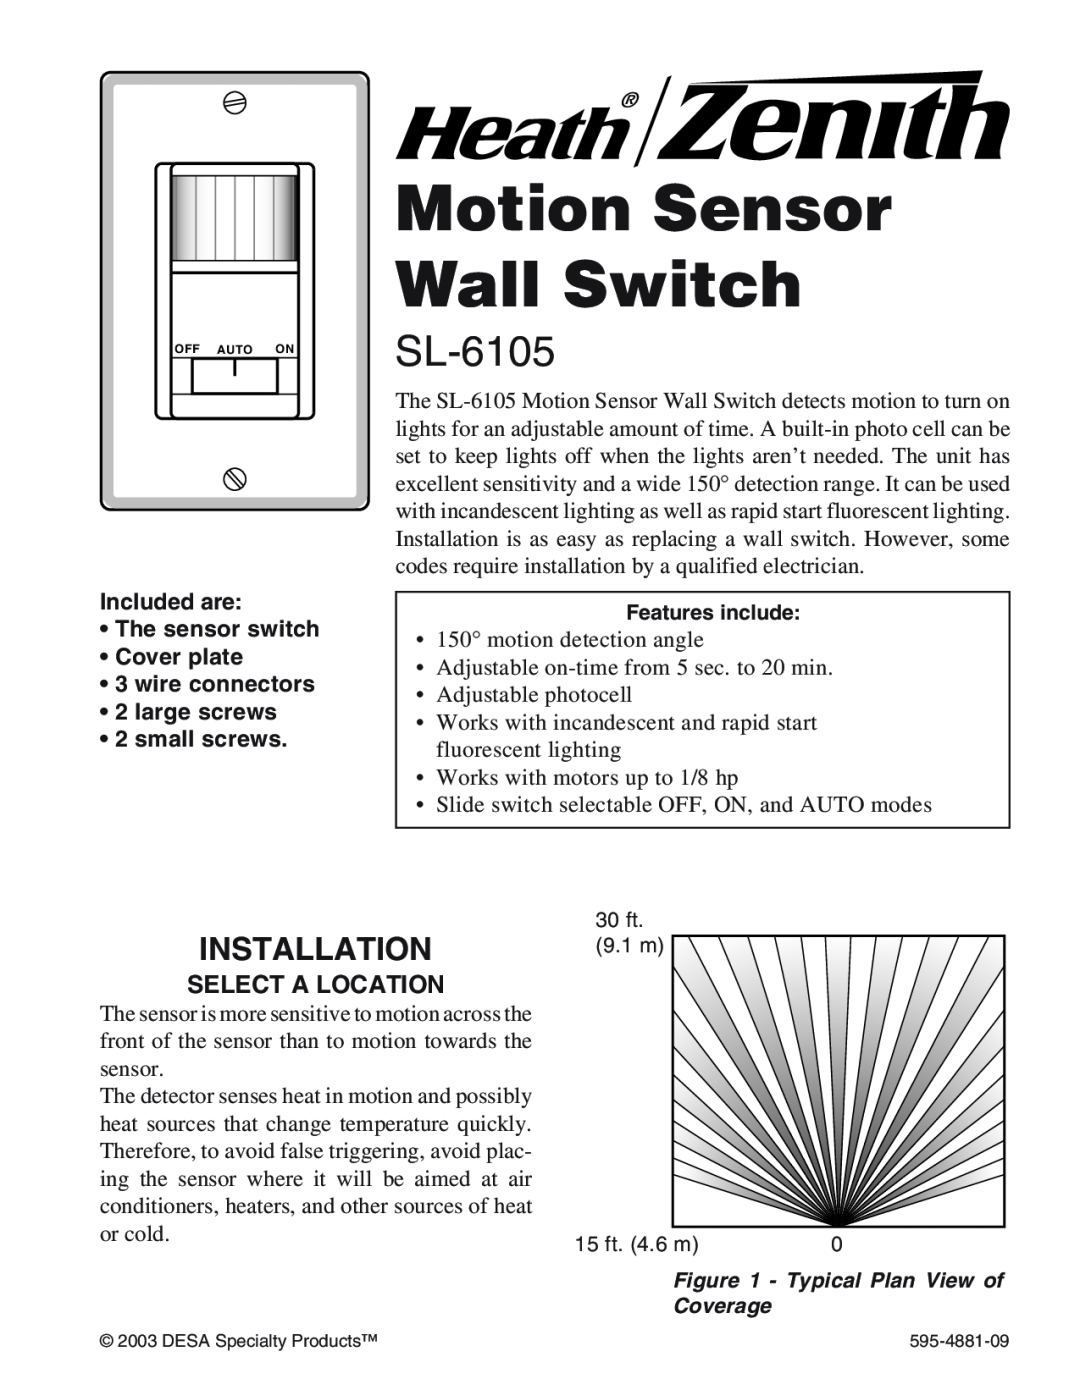 Heath Zenith SL-6105 manual Motion Sensor Wall Switch, Installation, Included are ¥The sensor switch ¥Cover plate 